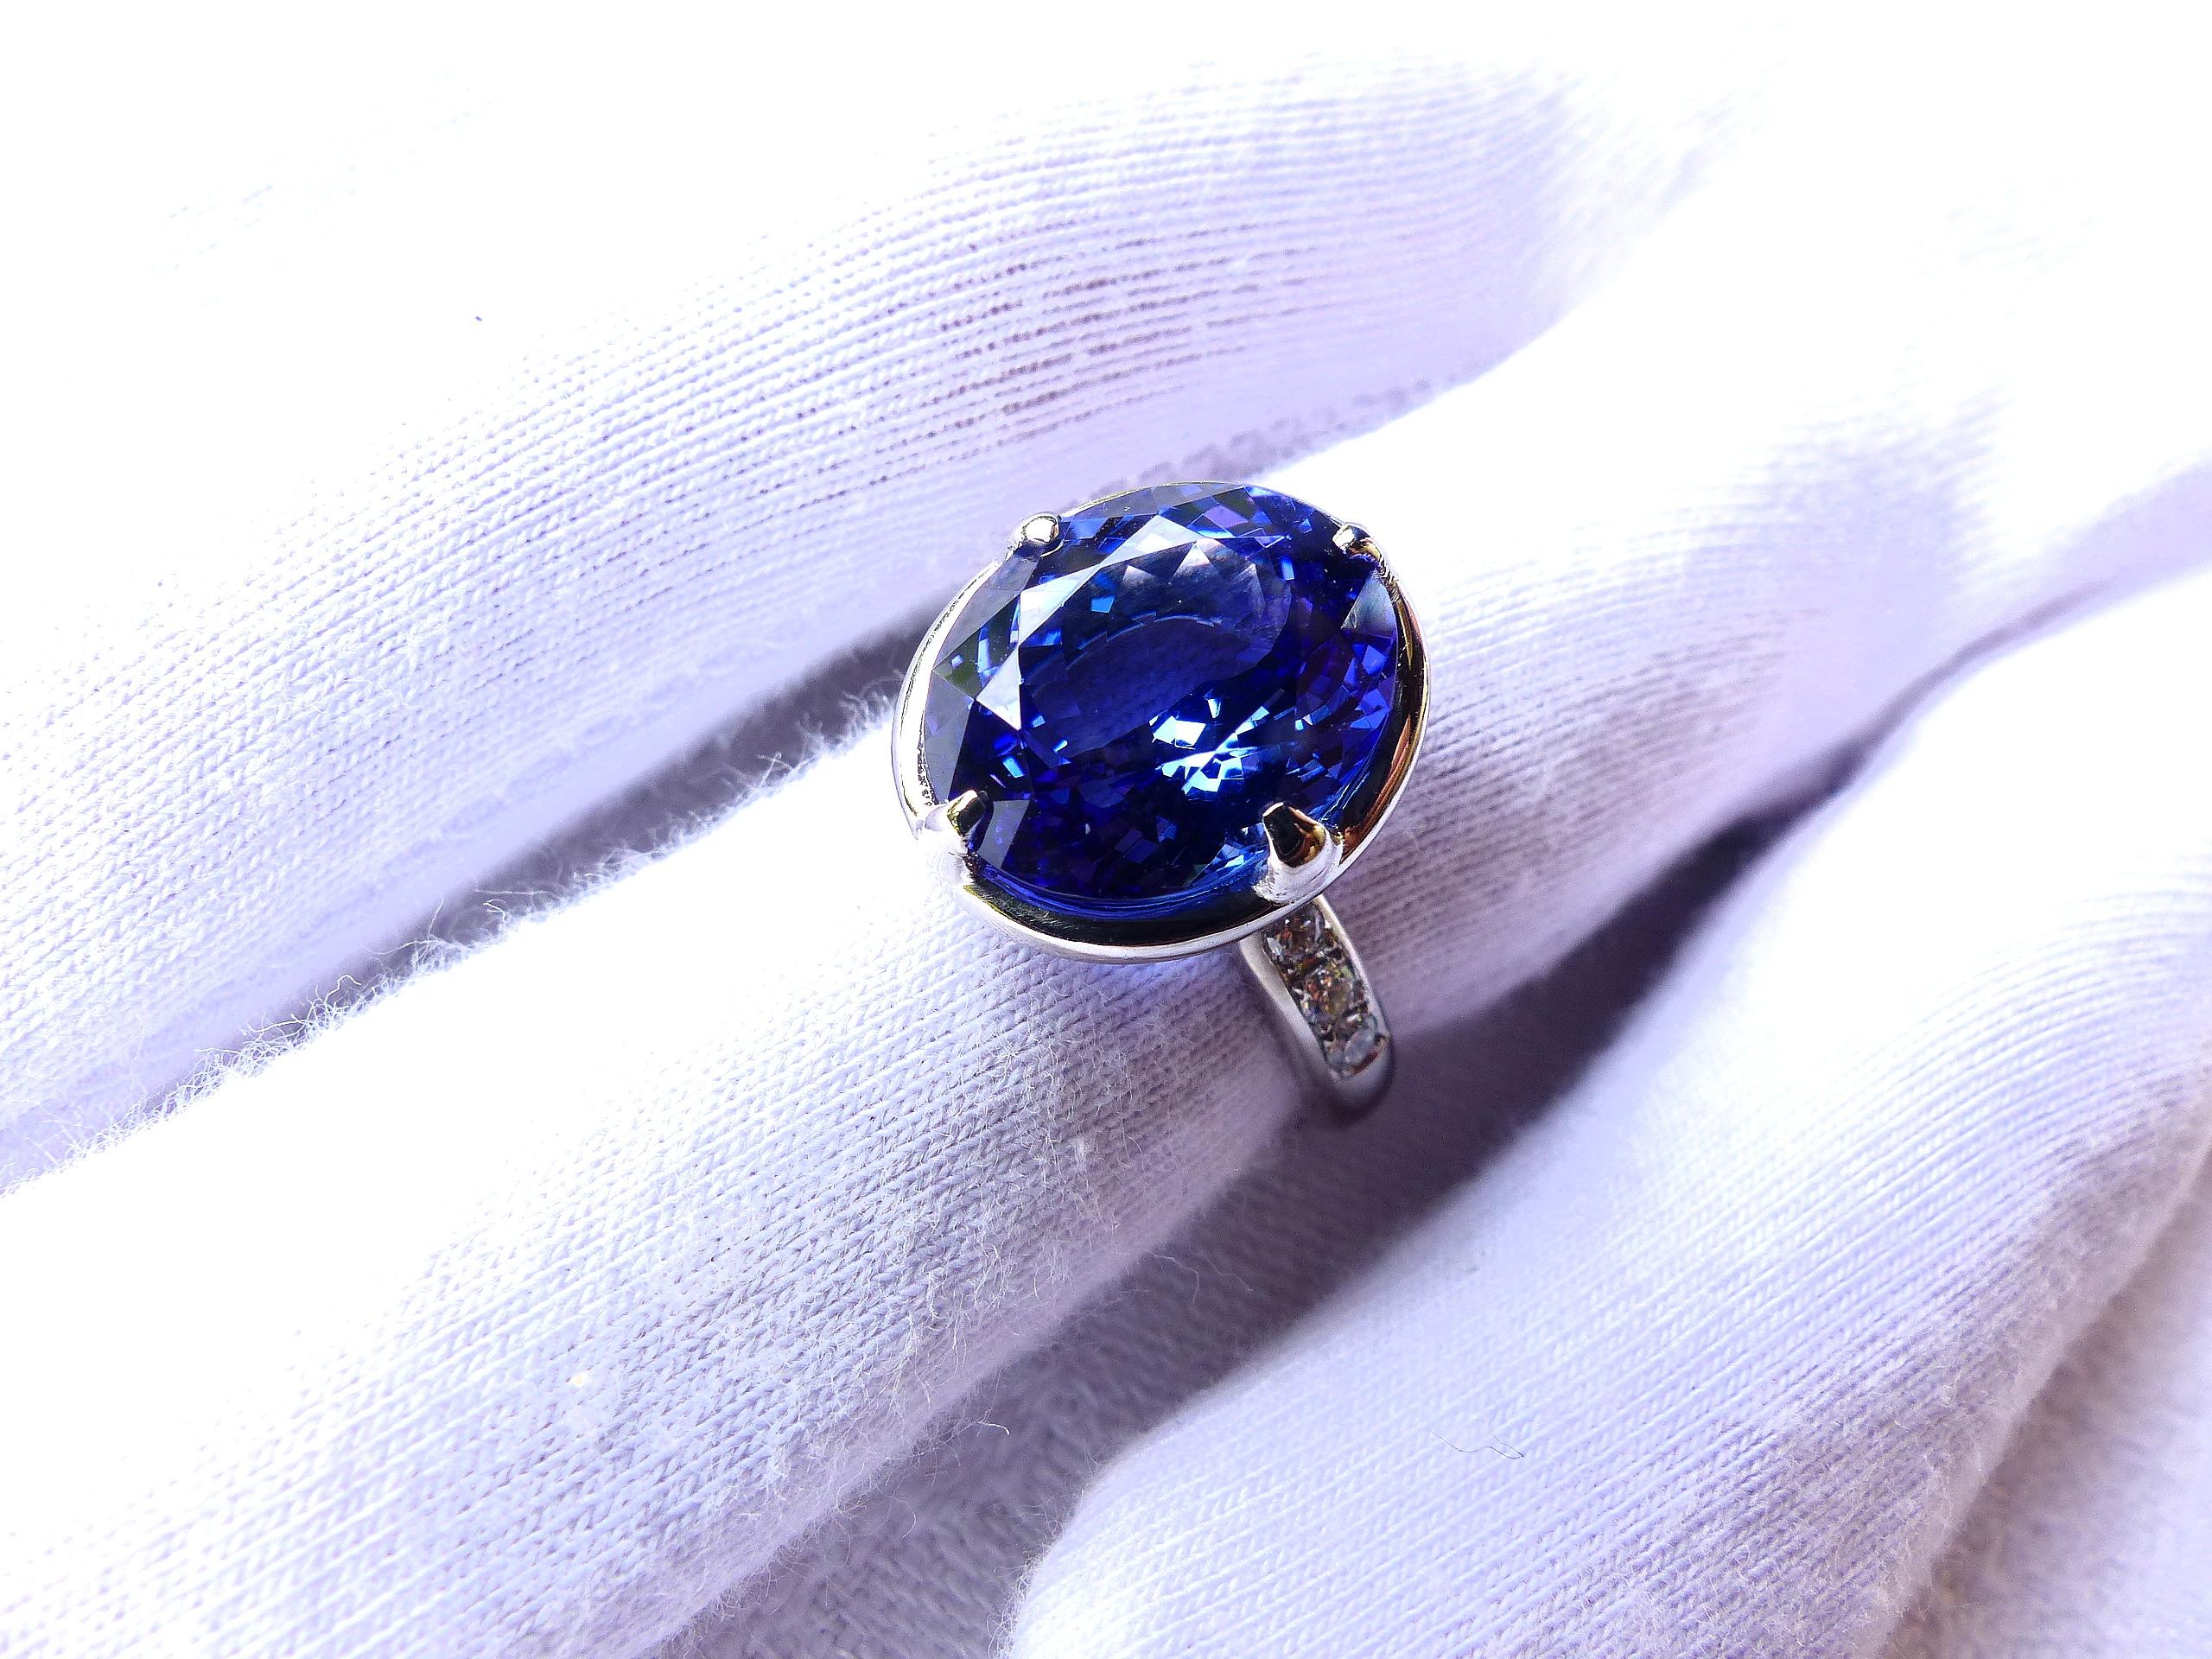 Contemporary Ring in Platinum with 1 Tanzanite oval 13x11mm, 7, 50ct. and Diamonds.